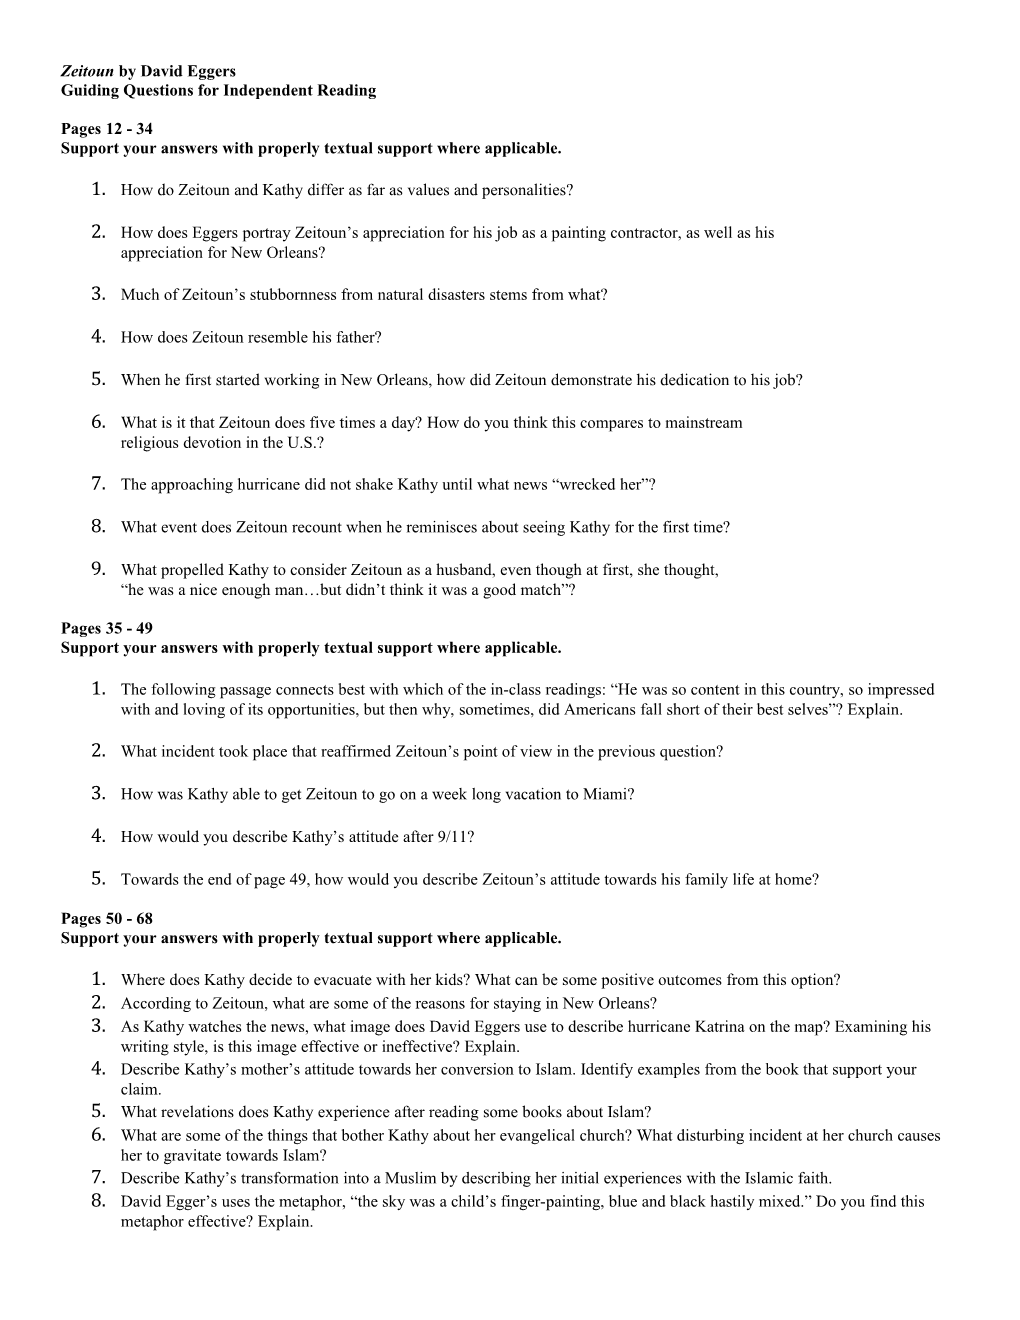 Guiding Questions for Independent Reading